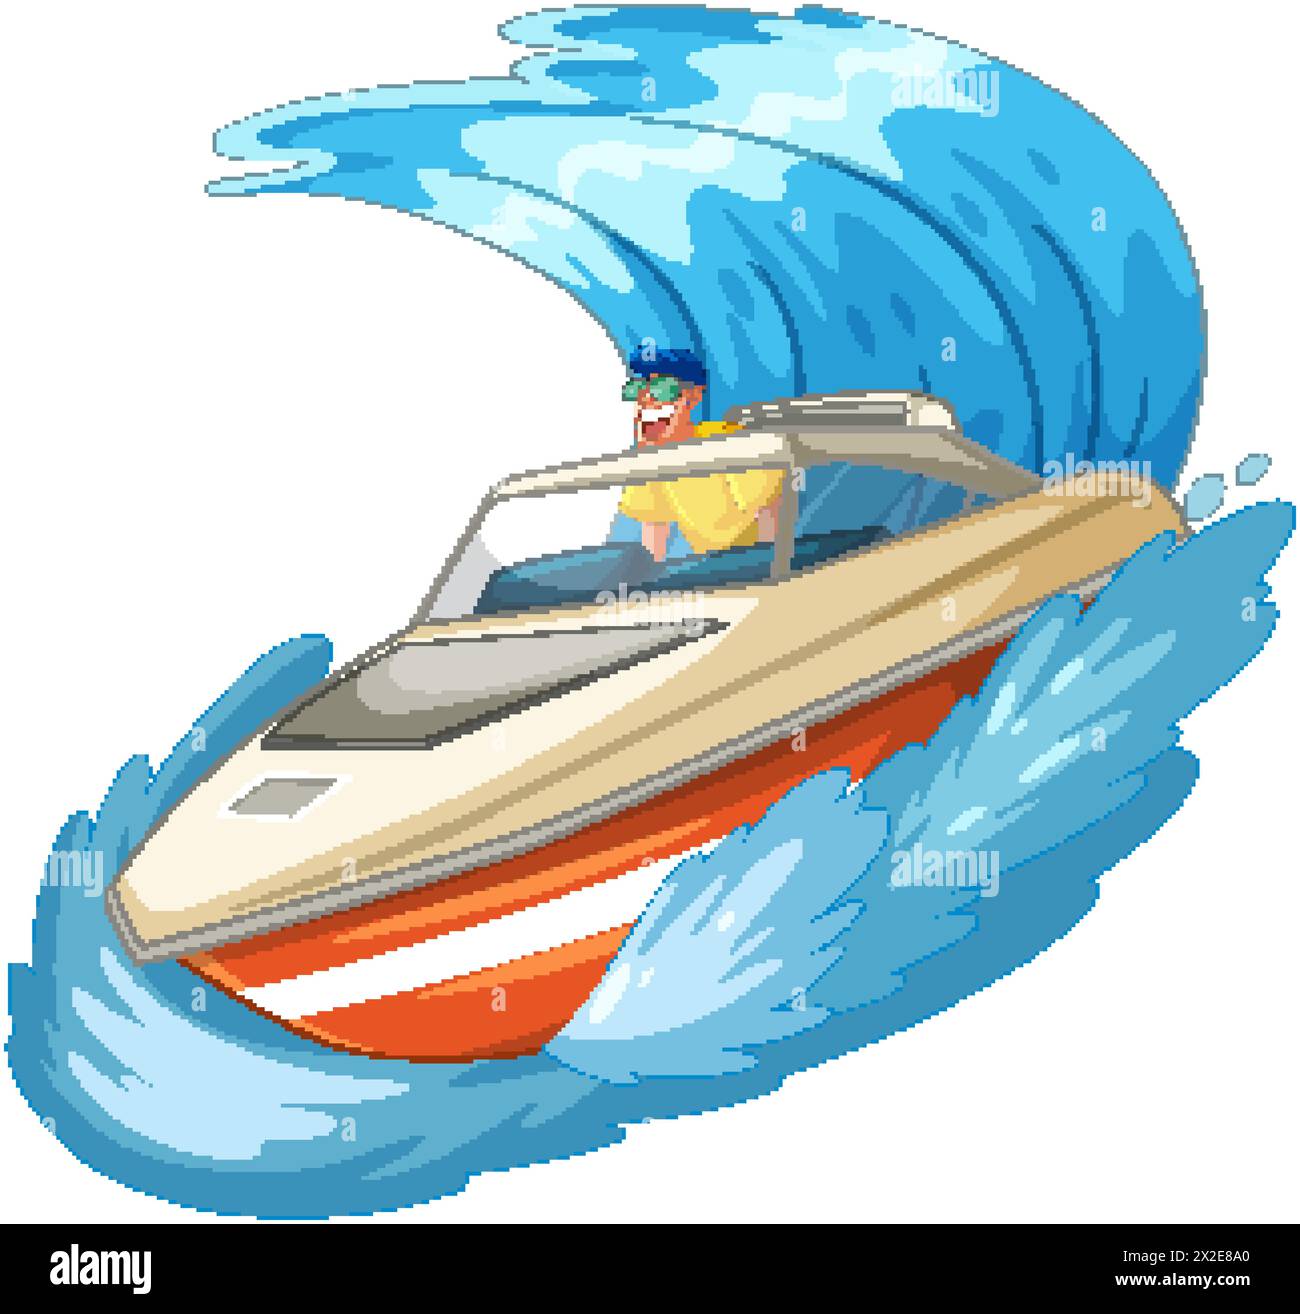 Colorful vector of a speedboat riding large blue waves Stock Vector